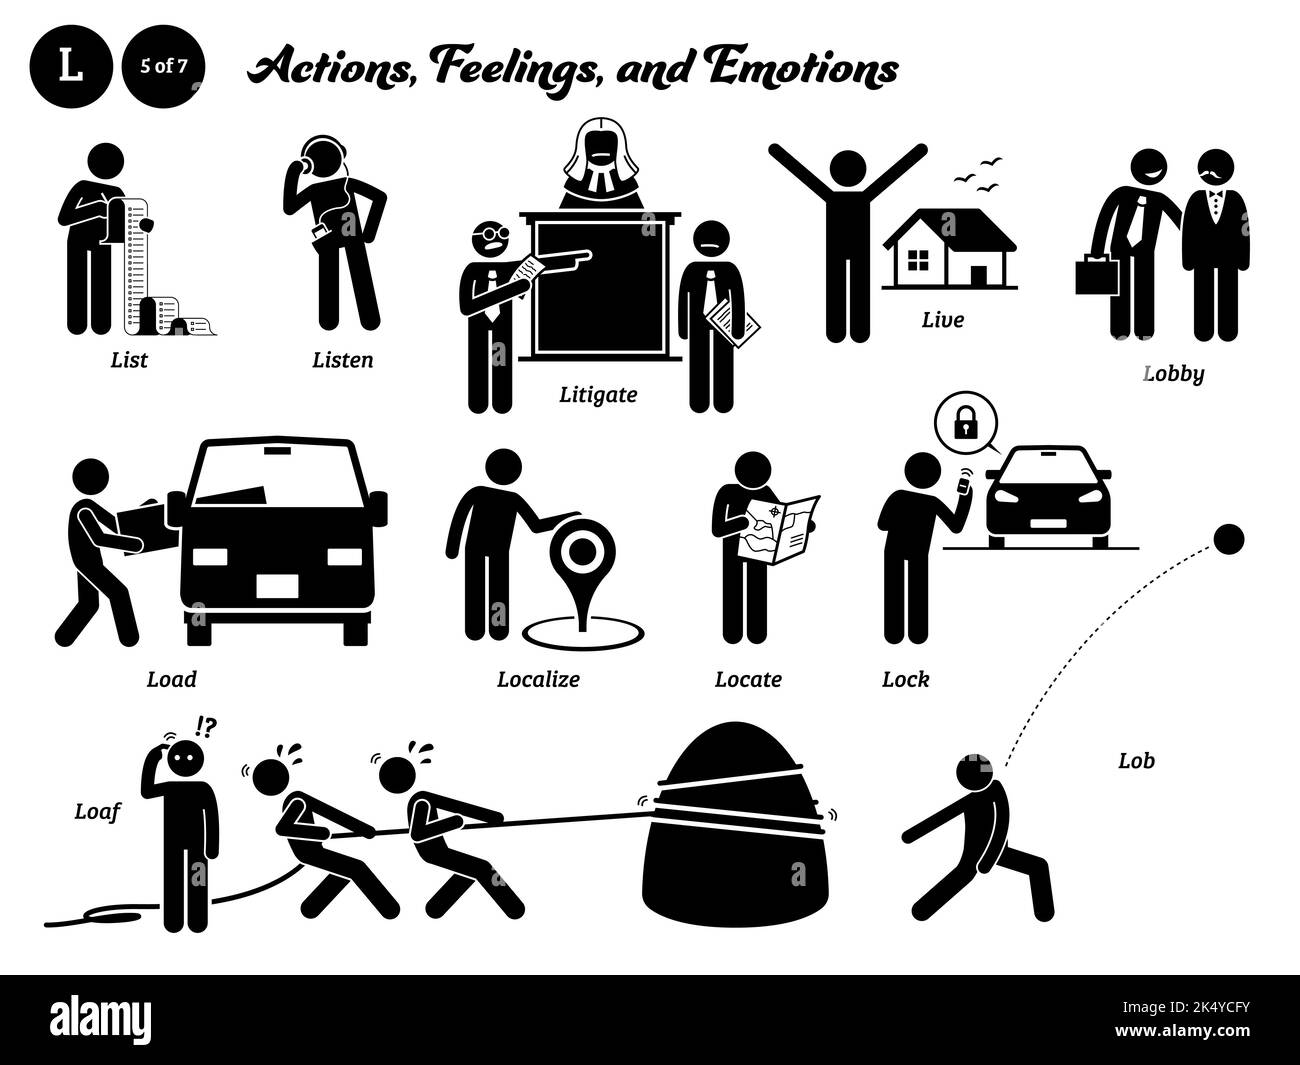 Stick figure human people man action, feelings, and emotions icons alphabet L. List, listen, litigate, live, lobby, load, localize, locate, lock, loaf Stock Vector